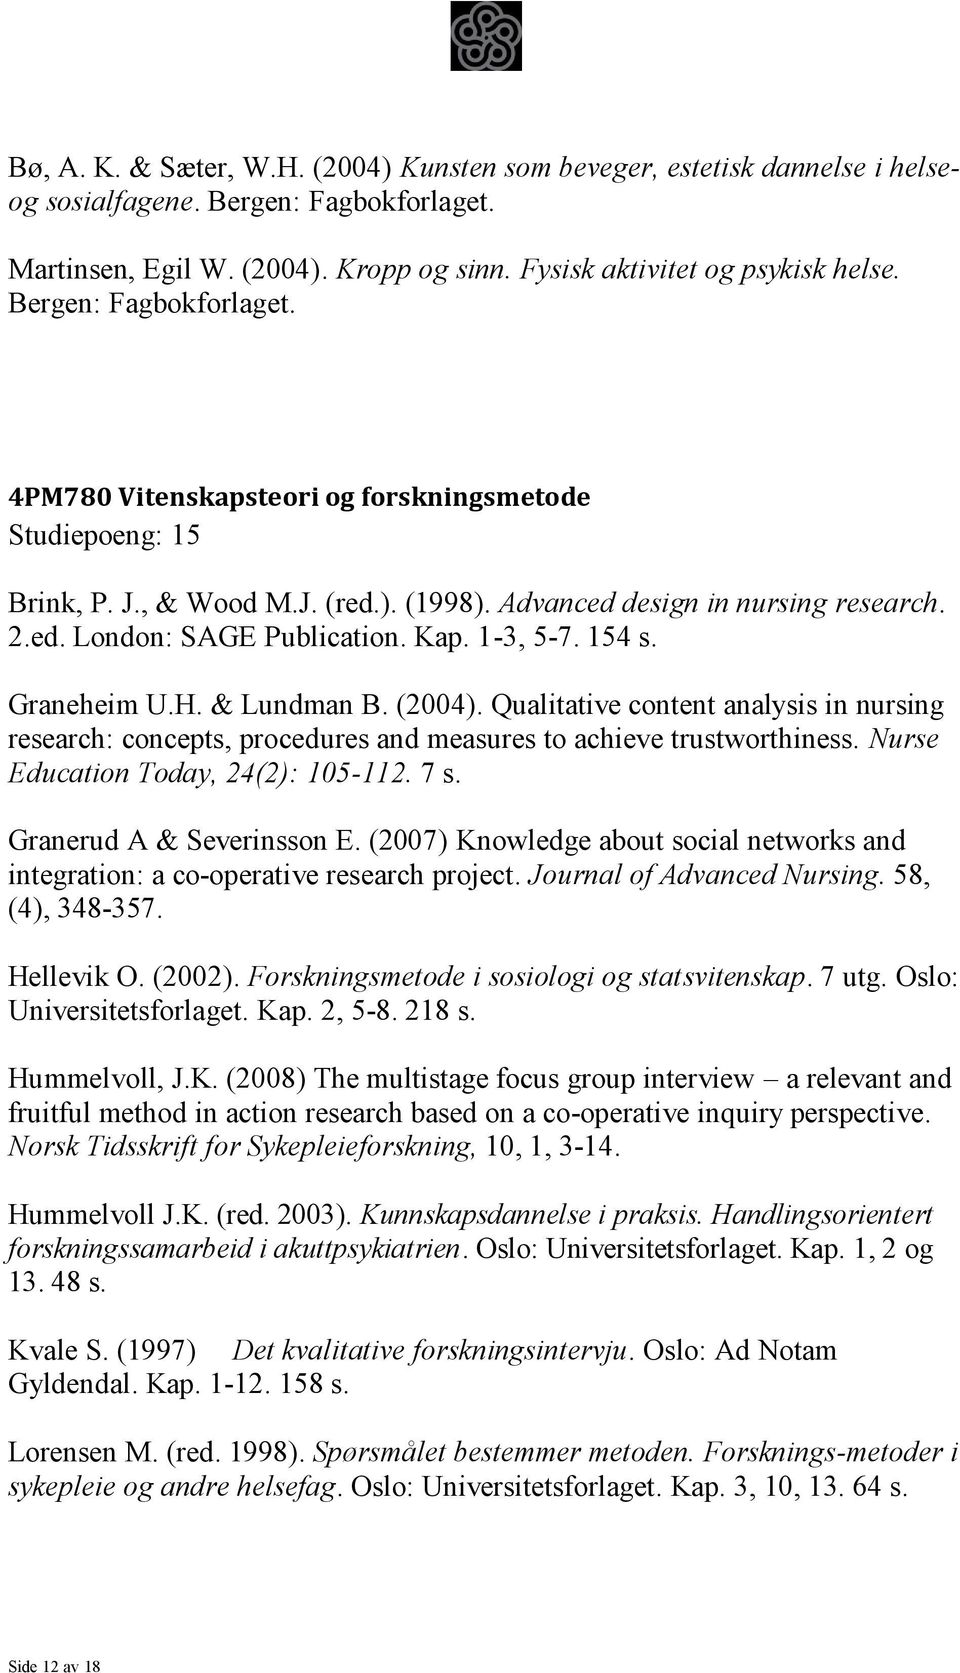 1-3, 5-7. 154 s. Graneheim U.H. & Lundman B. (2004). Qualitative content analysis in nursing research: concepts, procedures and measures to achieve trustworthiness.